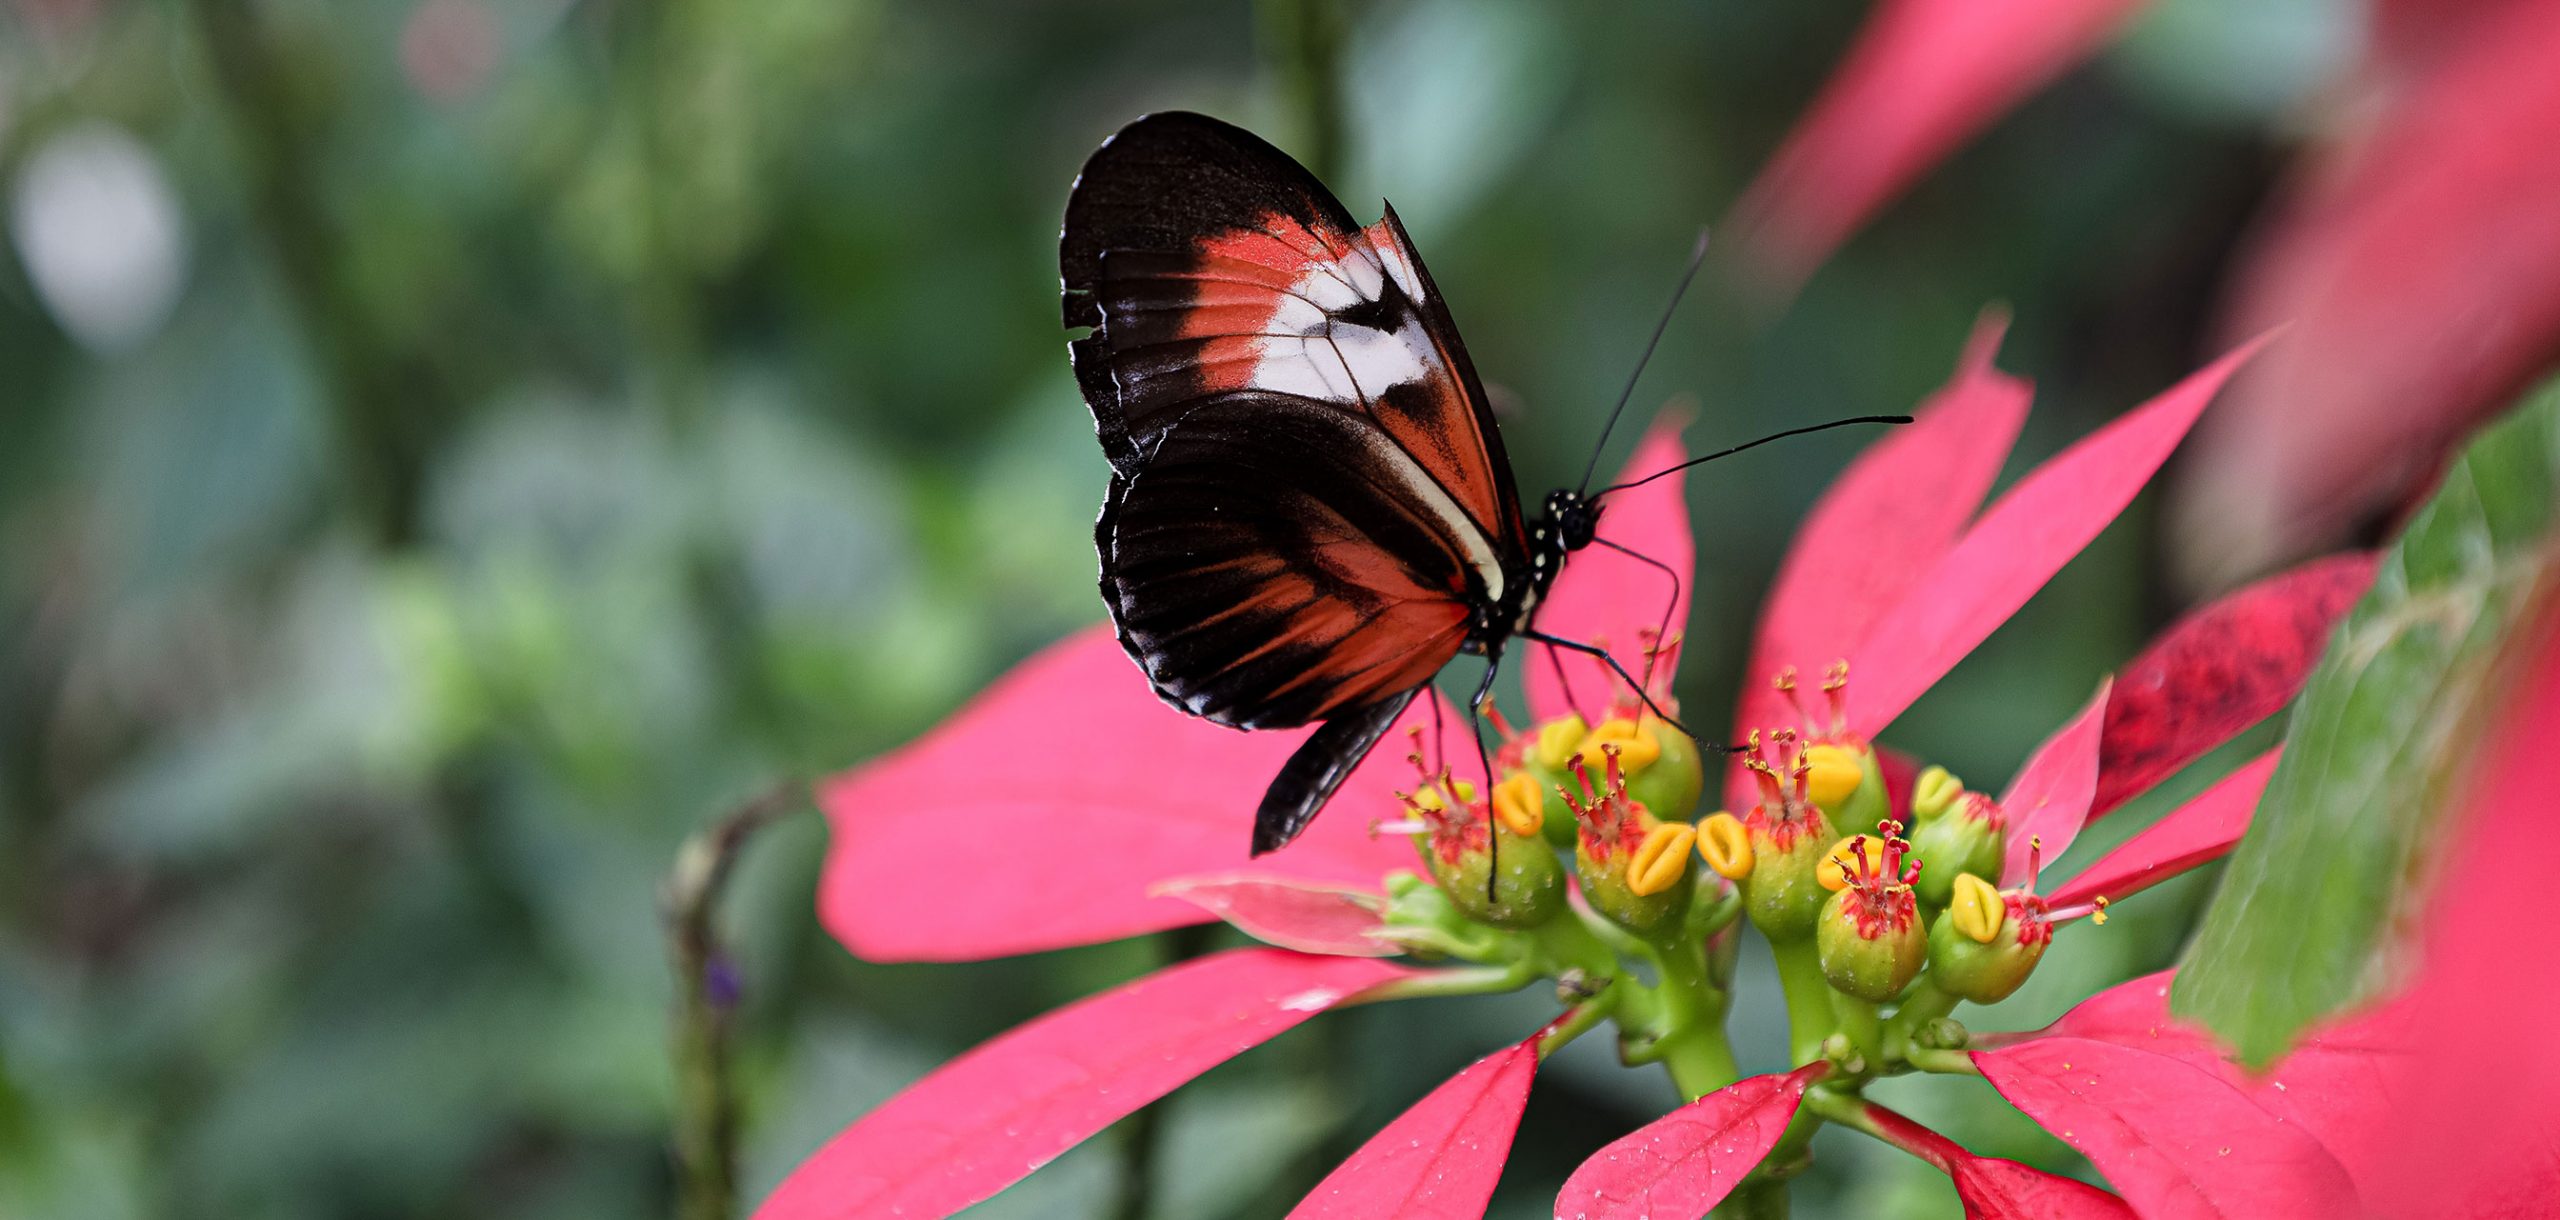 Butterfly World is located in Tradewinds Park in Coconut Creek, Florida, United States. It opened in 1988, and is the largest butterfly park in the world, and the first park of its kind in the West